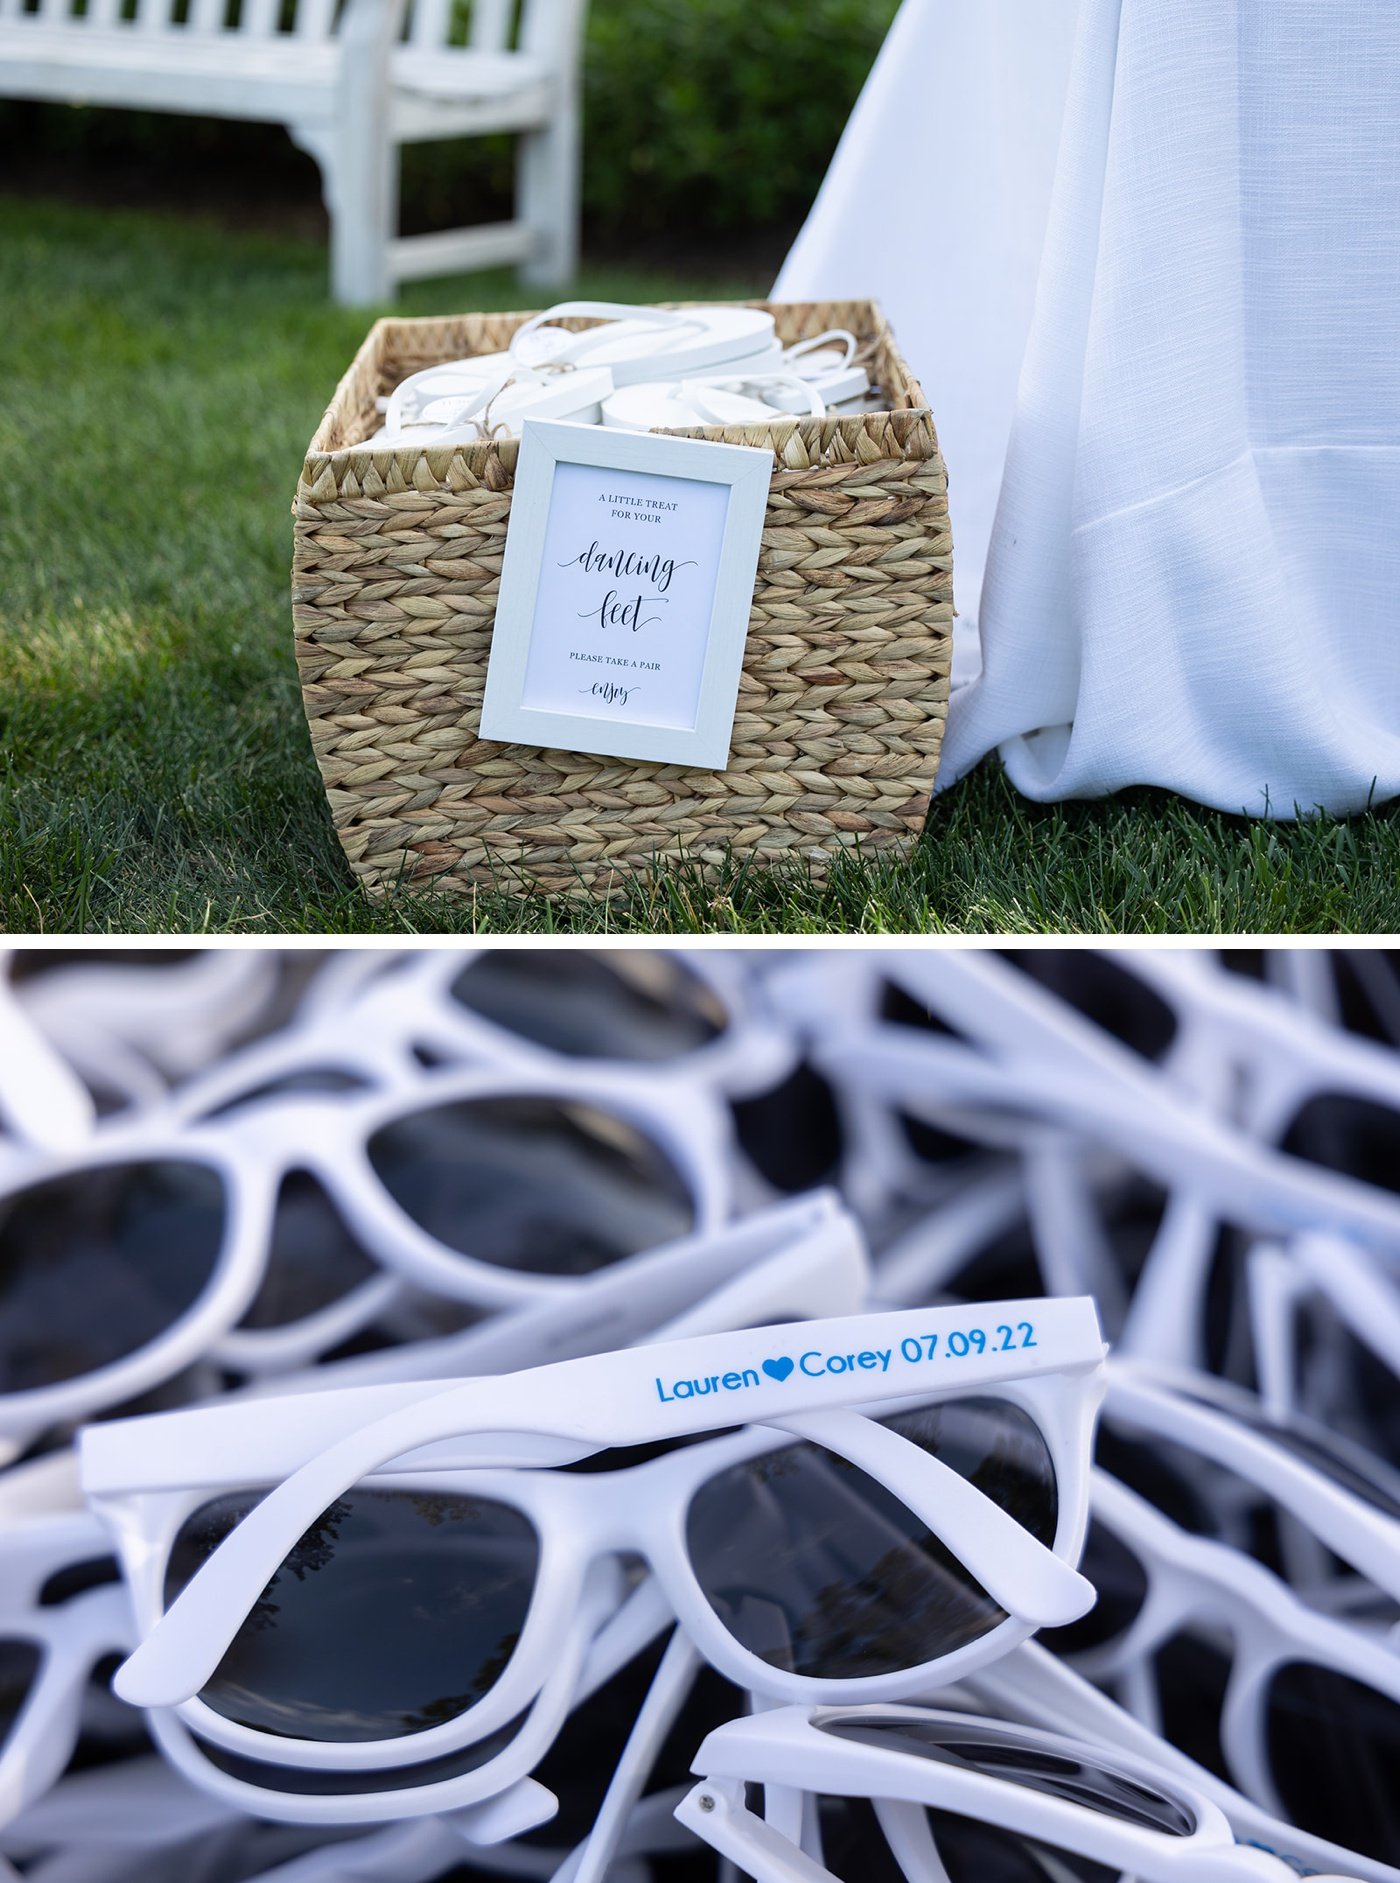 Customized sunglasses and flip-flops for guests at an outdoor wedding